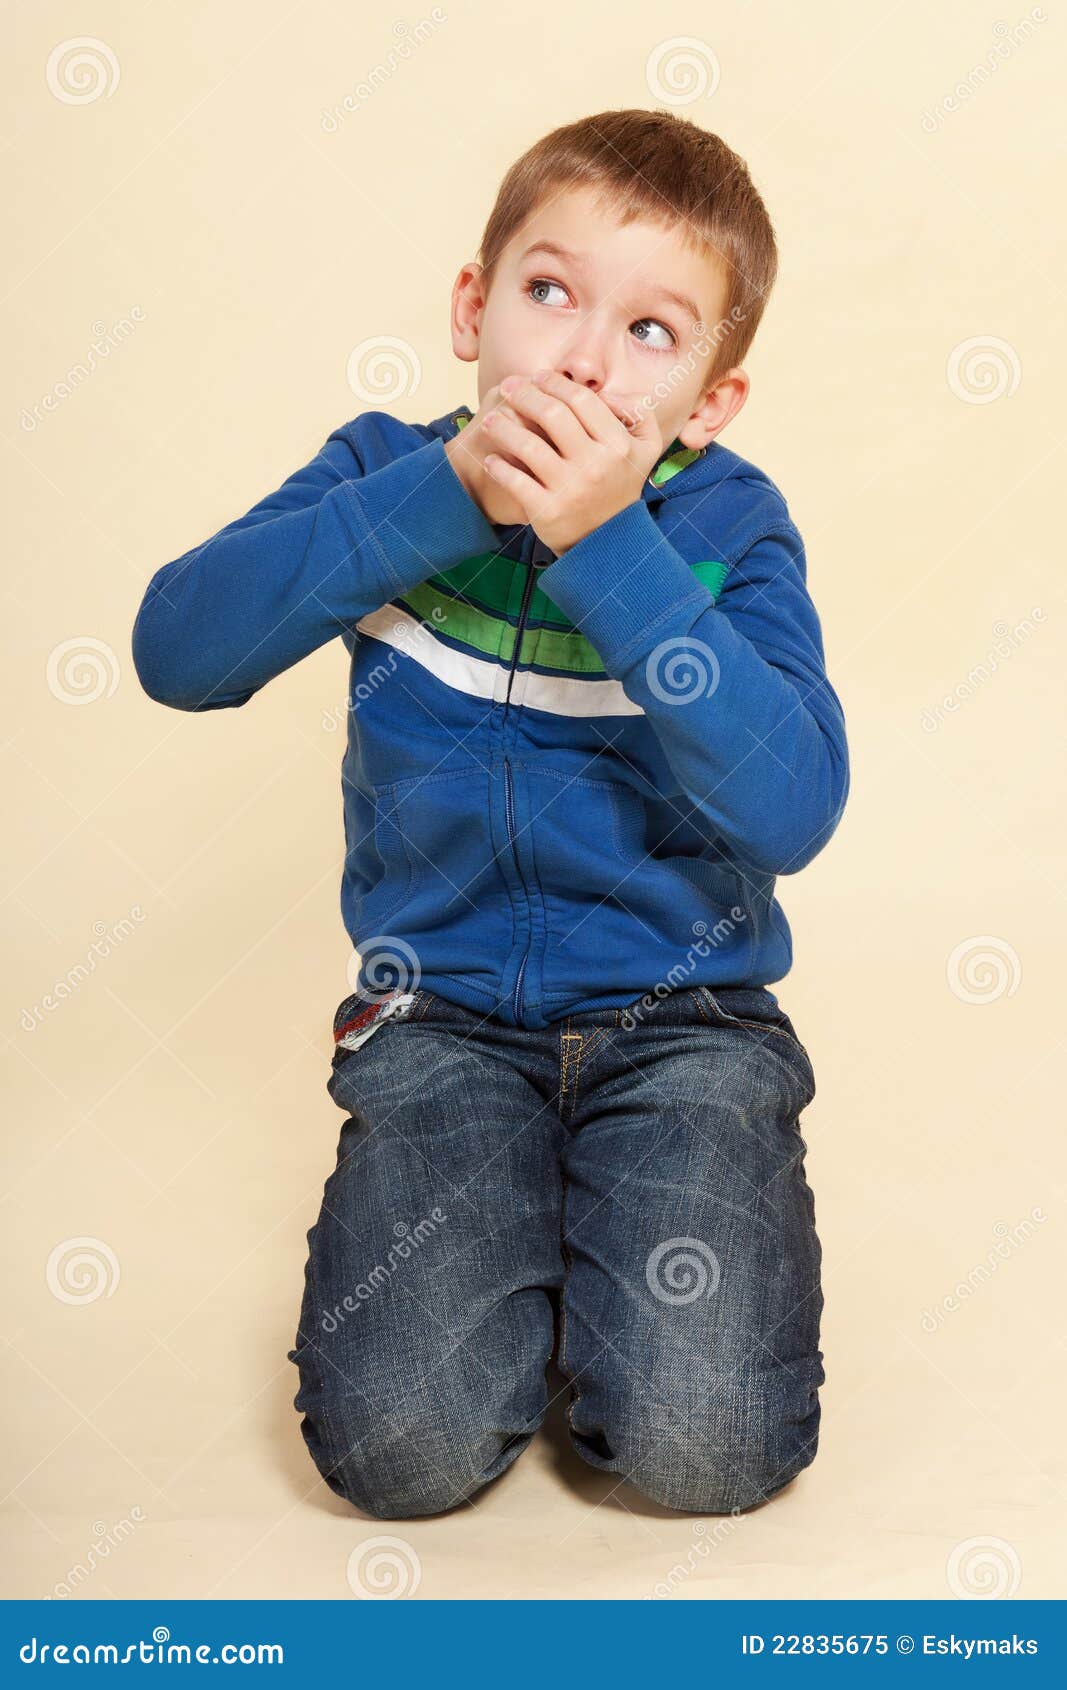 Oh shit, caught. Young boy with hands over his mouth isolated on neutral background. Facial expressions concept.